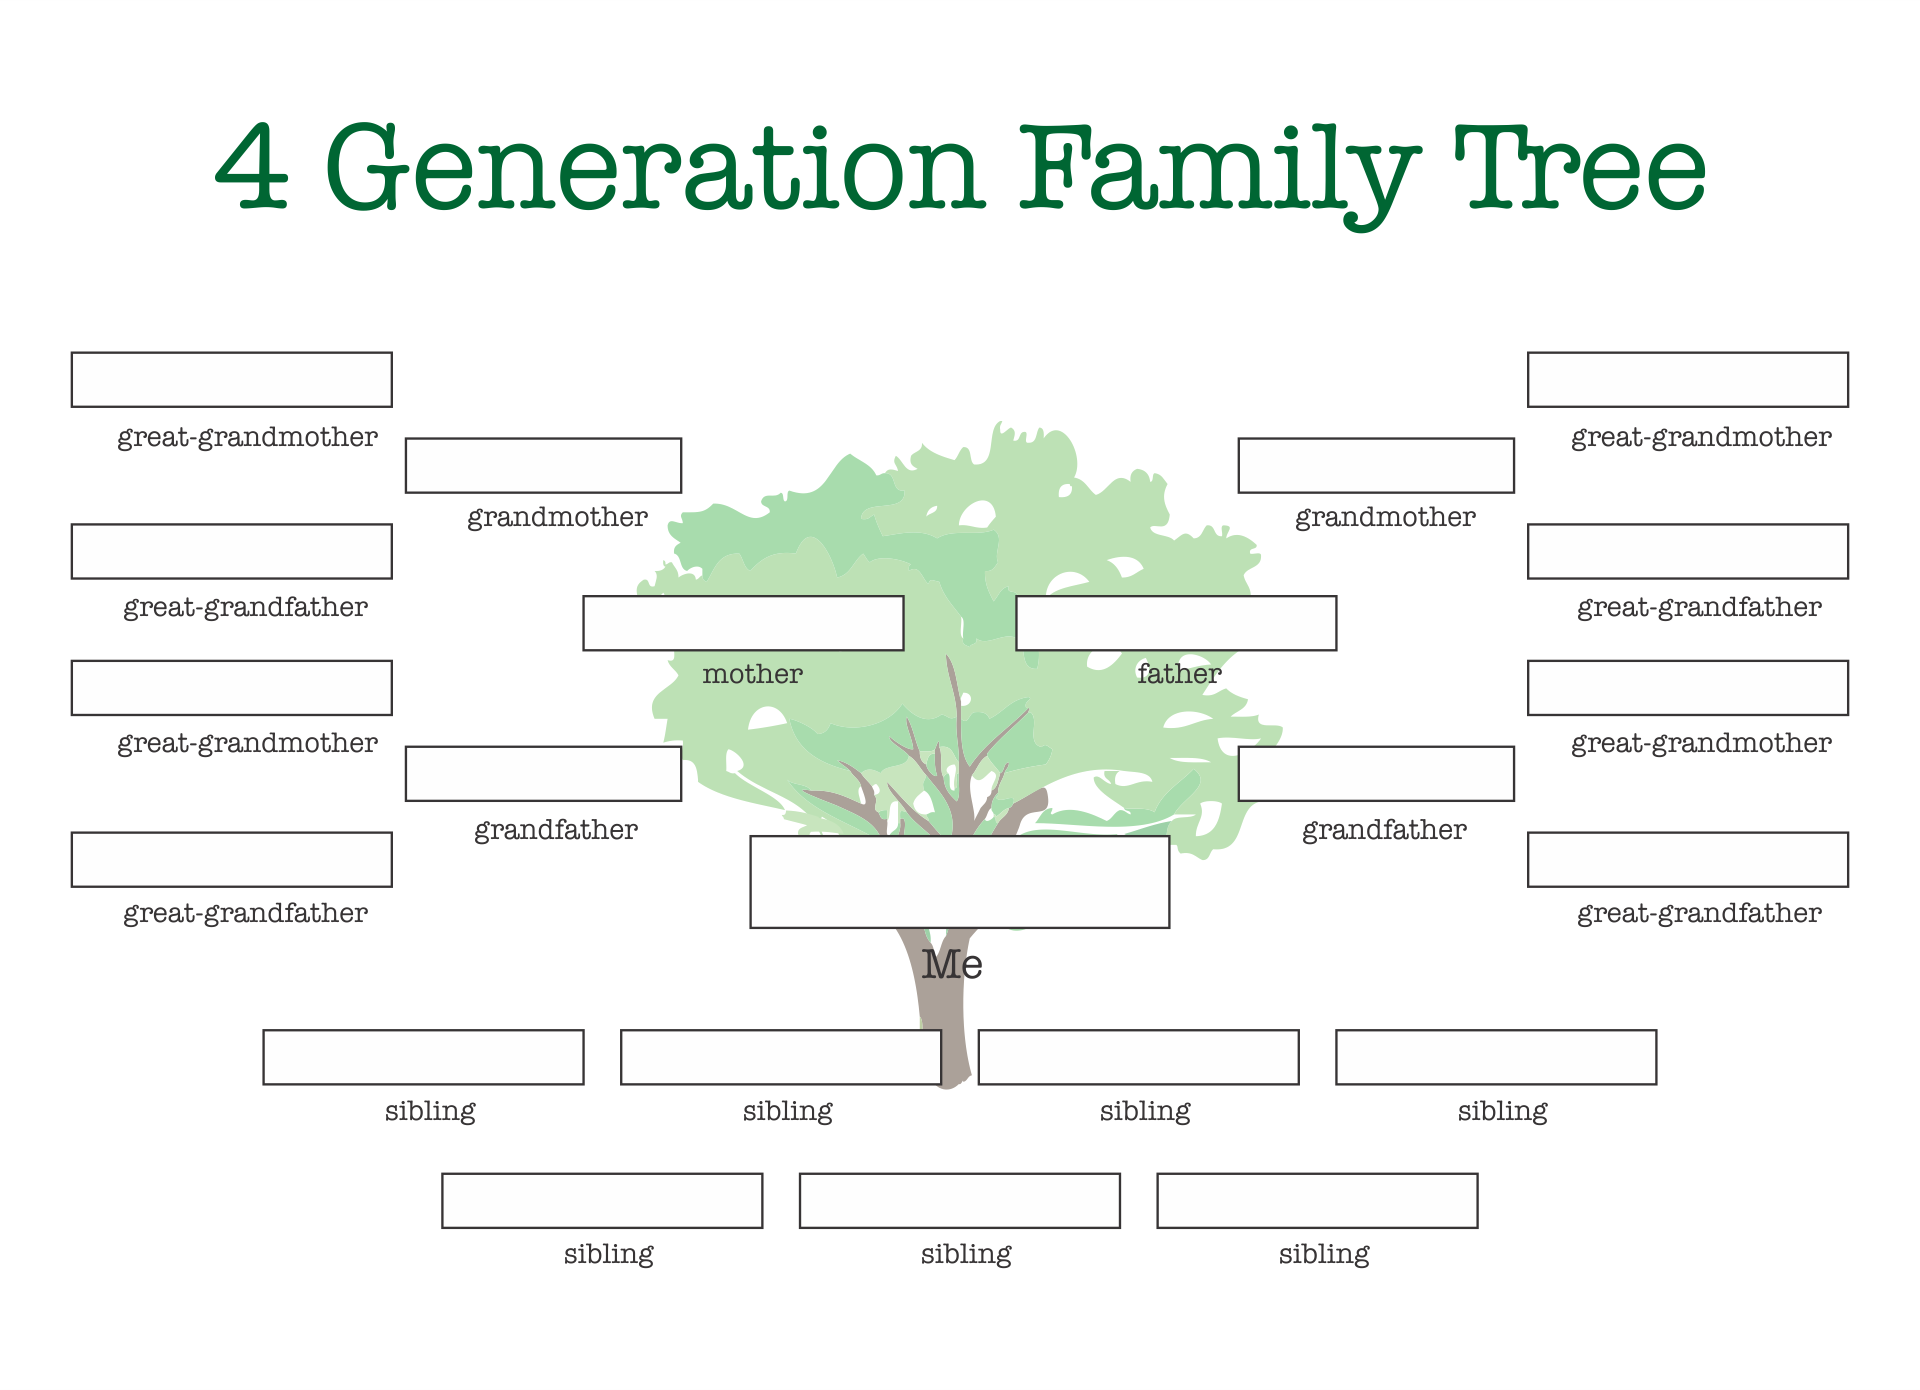 blank family tree with 3 siblings